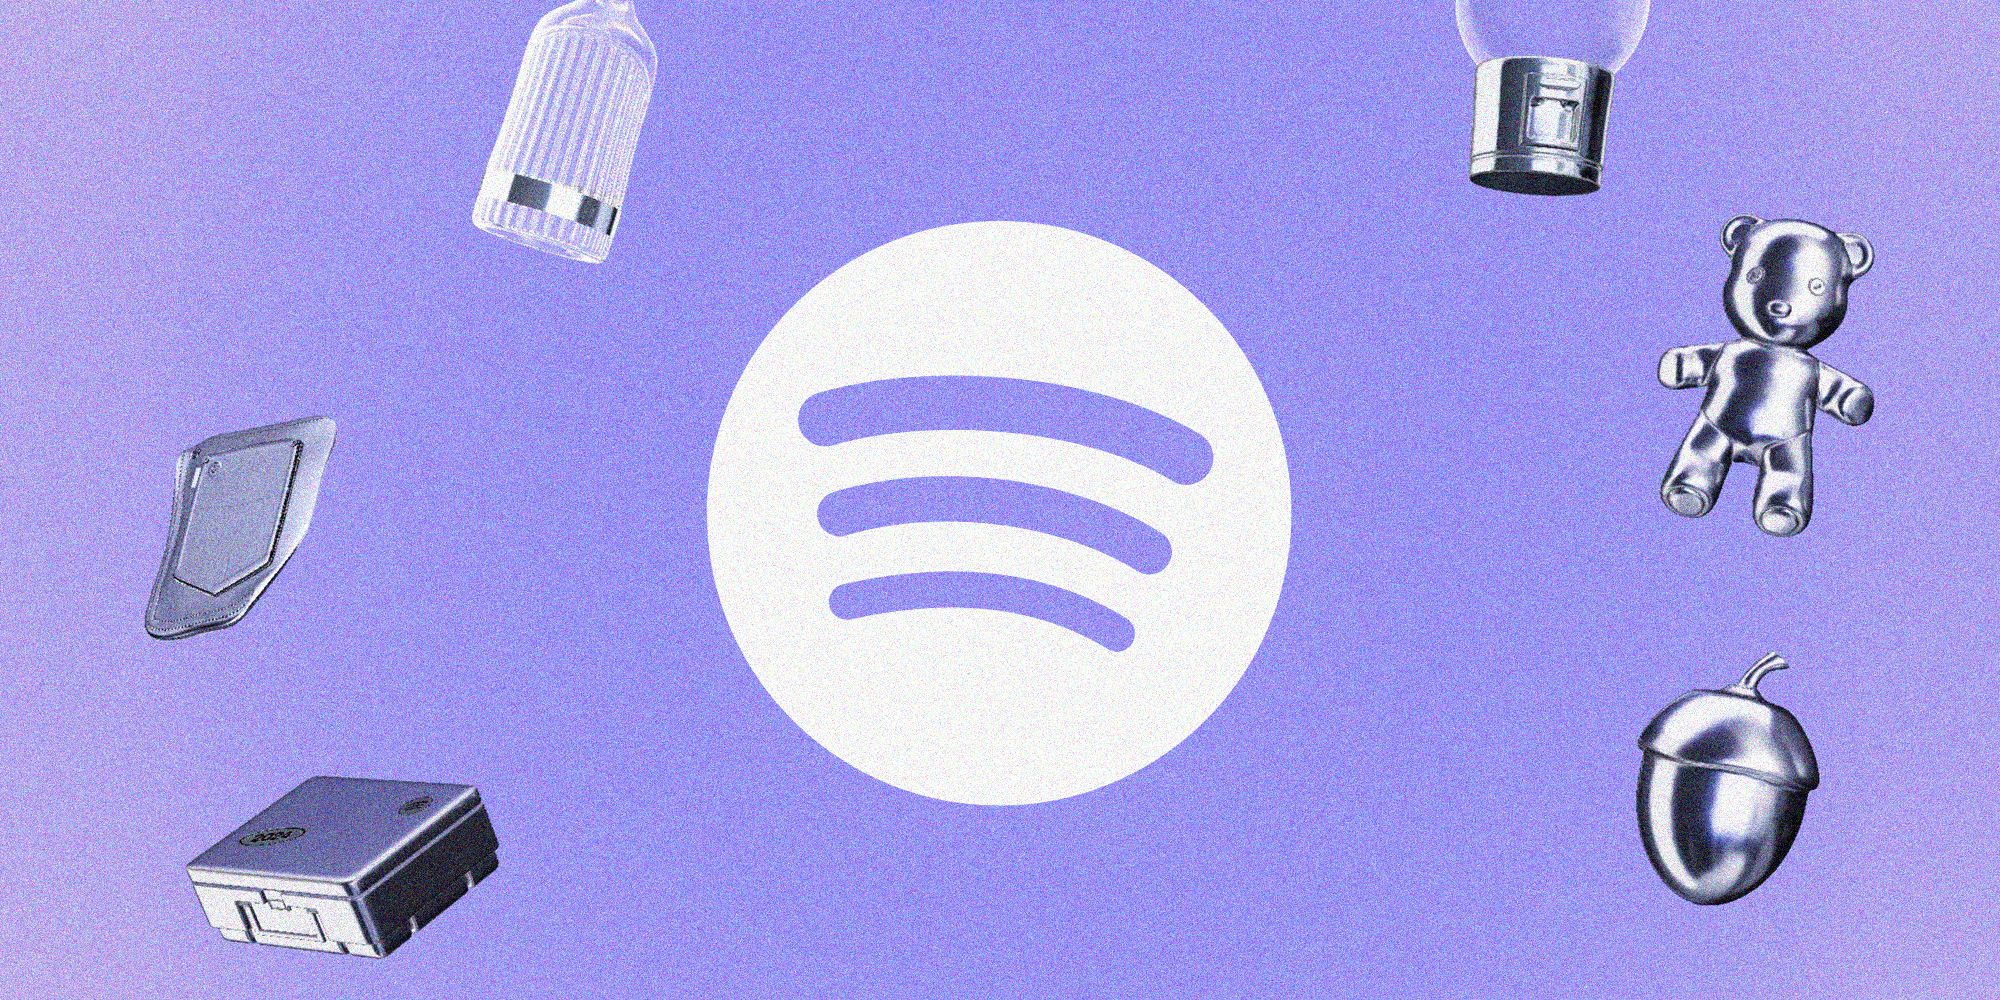 a graphic featuring the Spotify logo in white on a purple background, surrounded by metallic objects including a teddy bear, an acorn, and a lightbulb